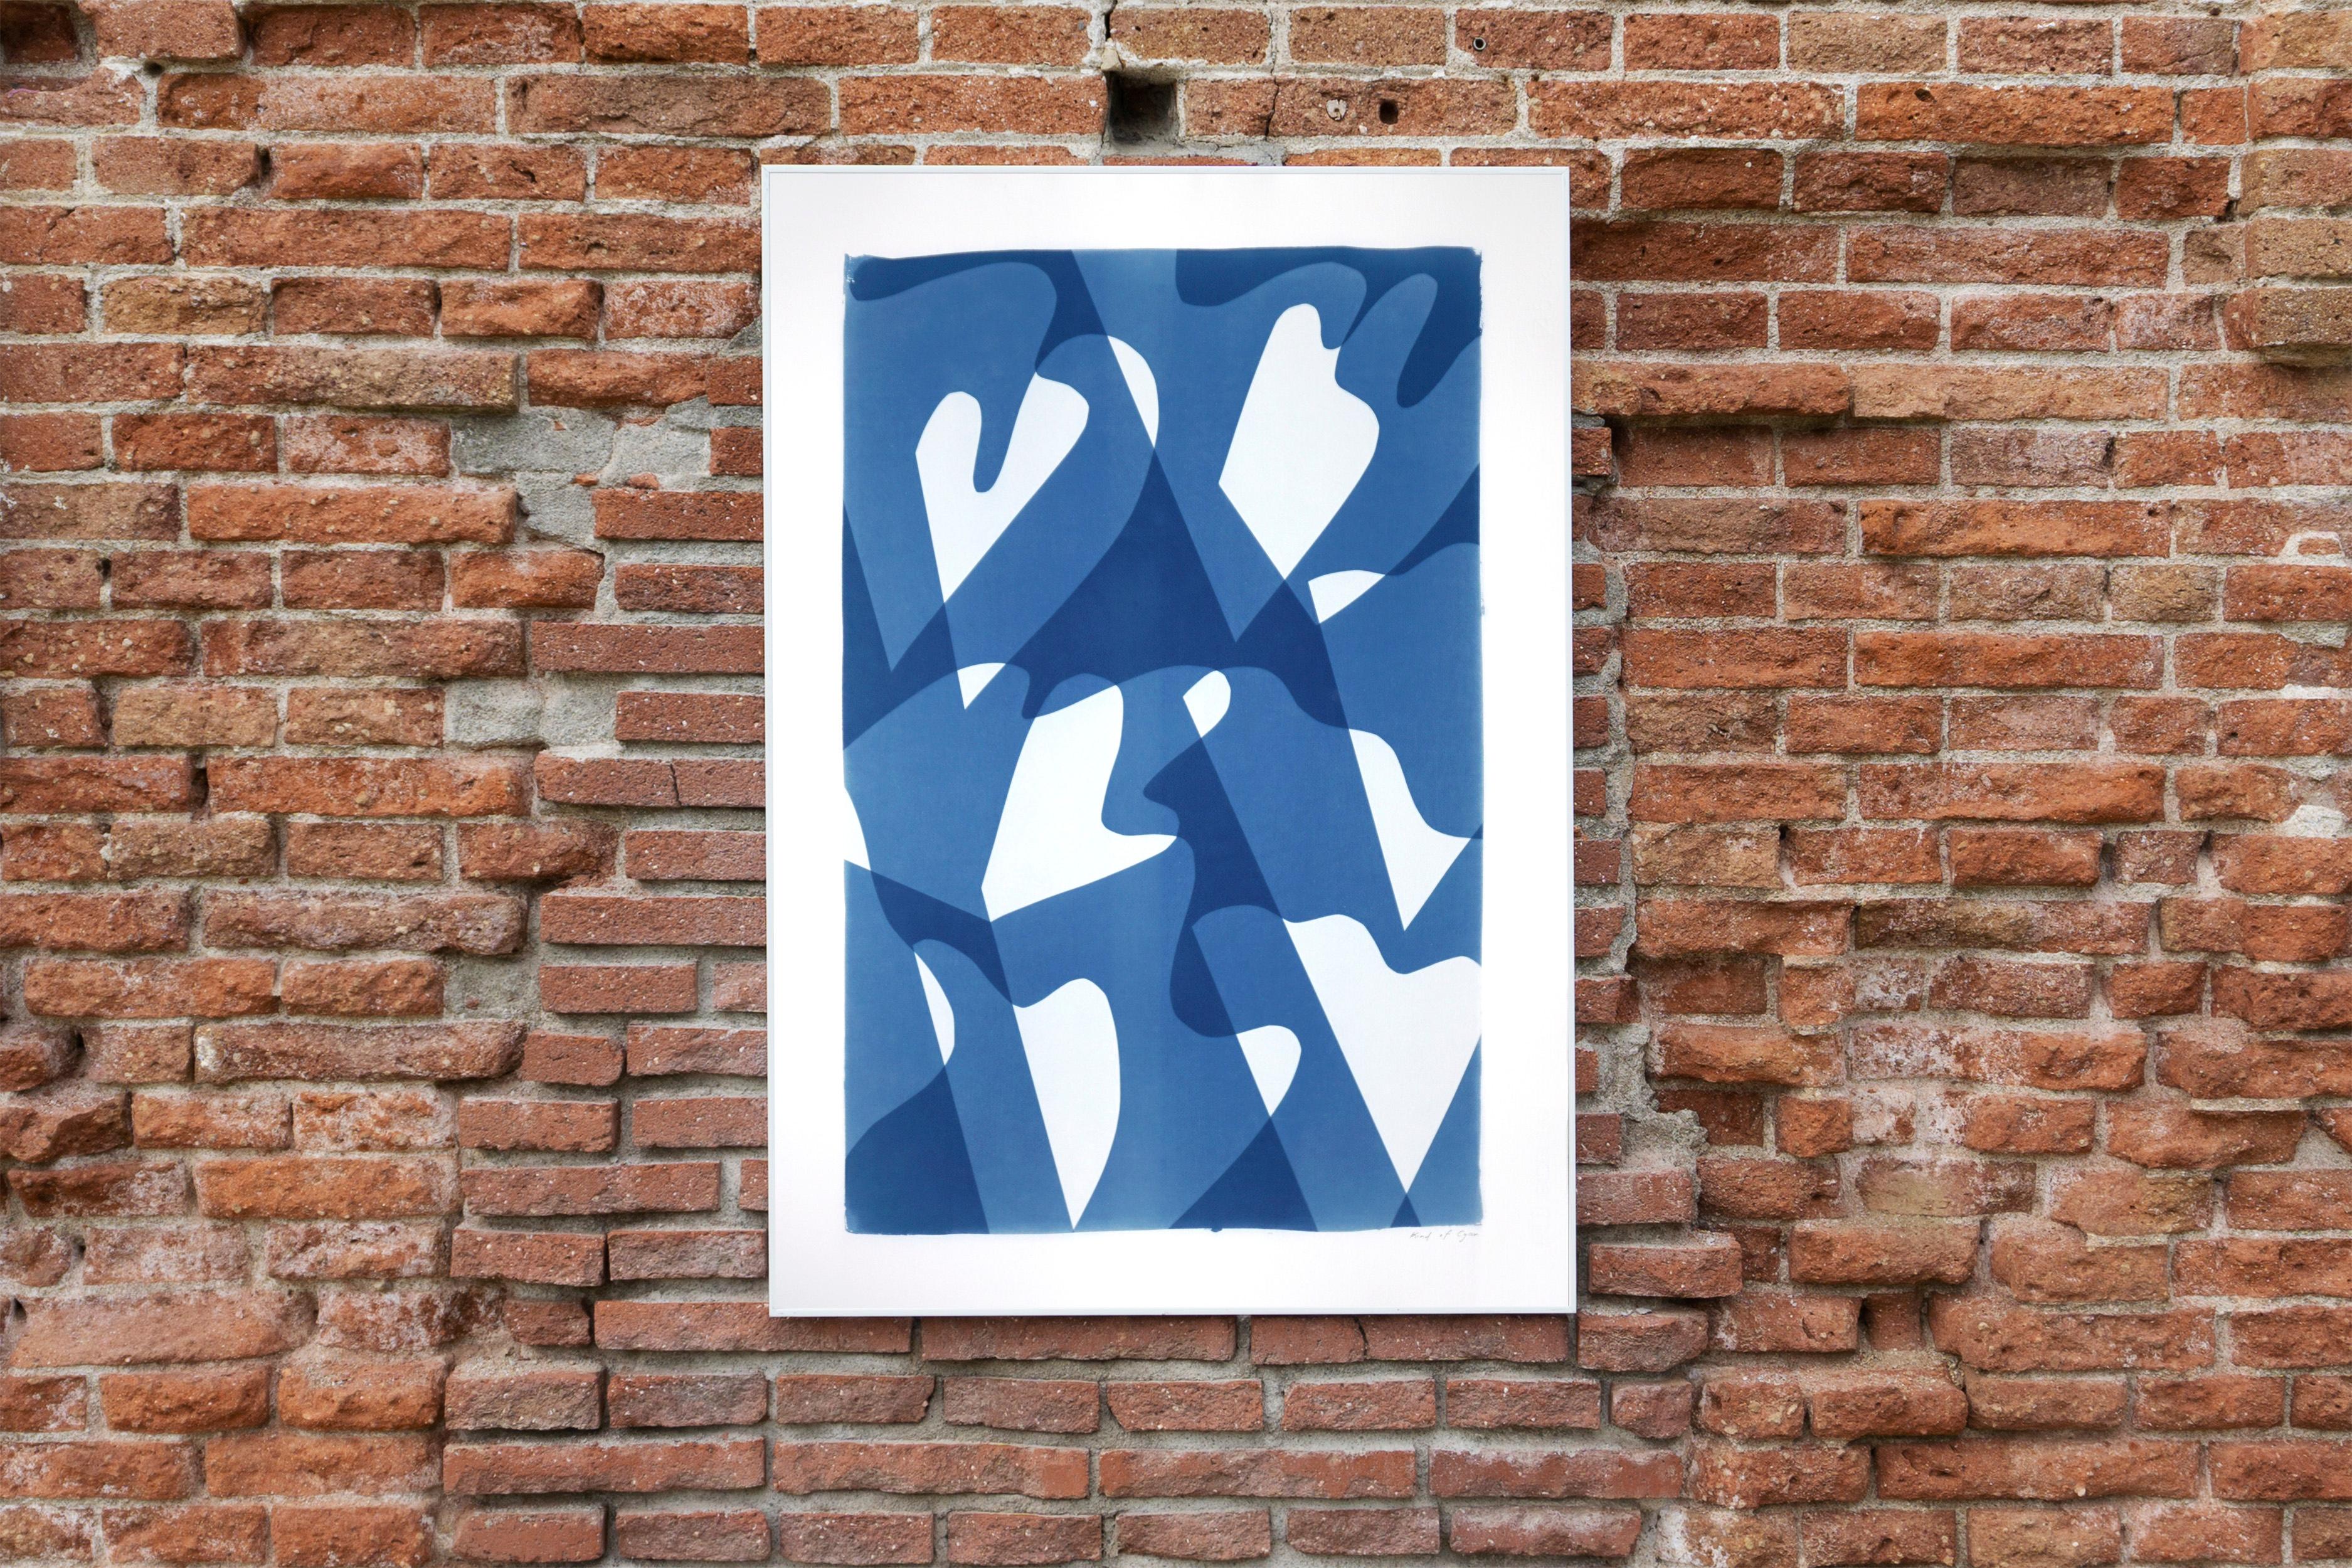 Wind over Waters, Blue and White Monotype, Abstract Modern Shapes and Layers 4